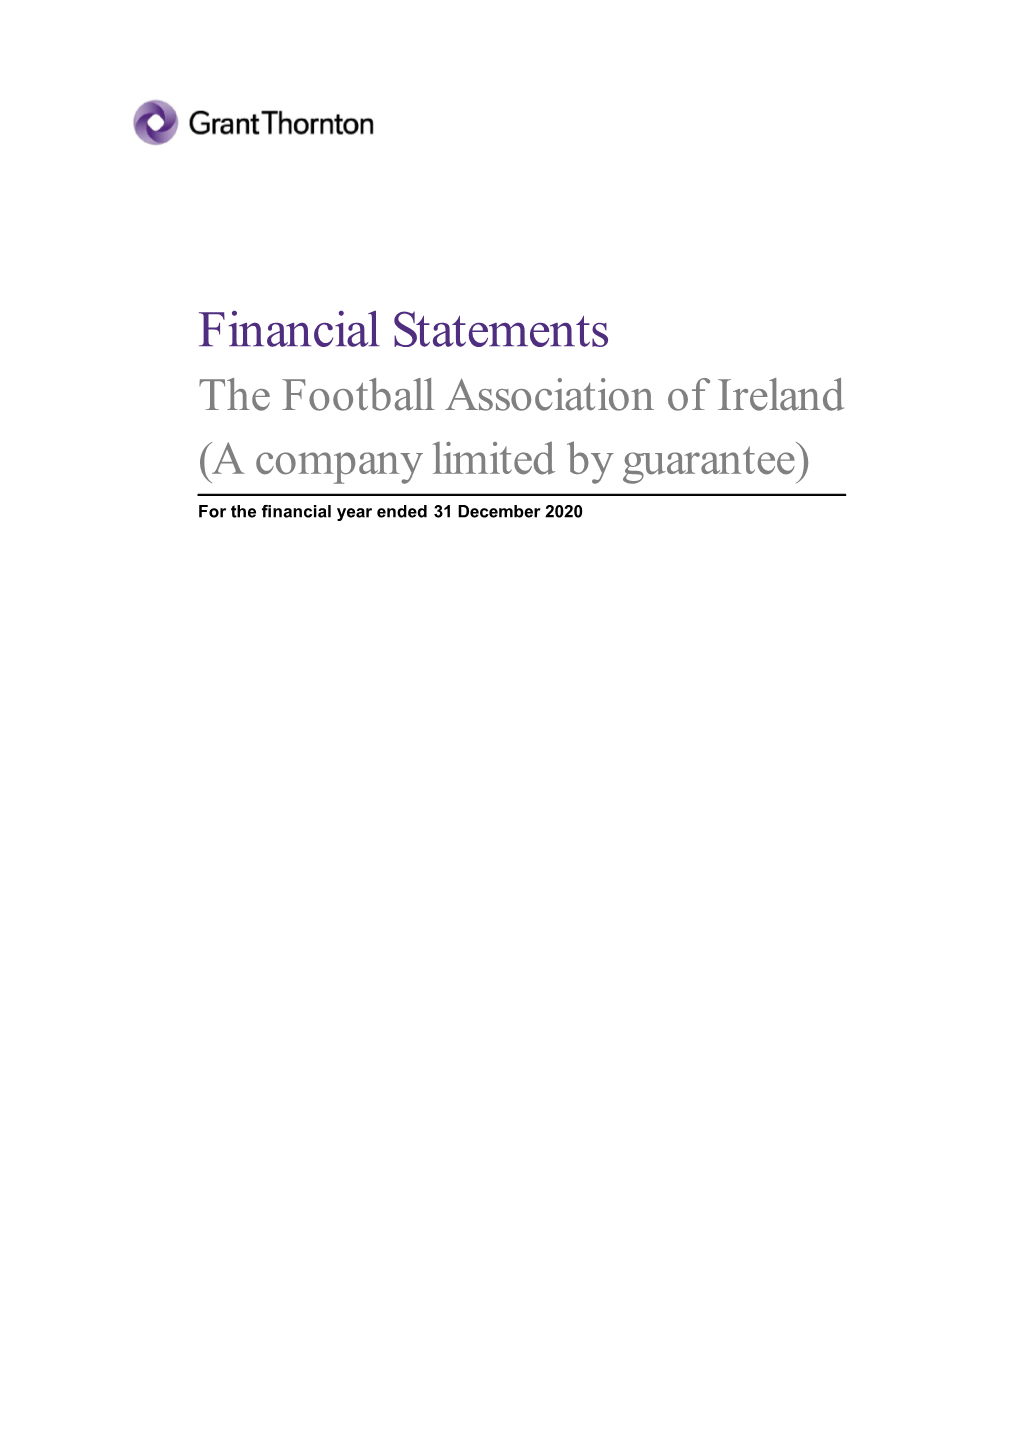 Financial Statements the Football Association of Ireland (A Company Limited by Guarantee)